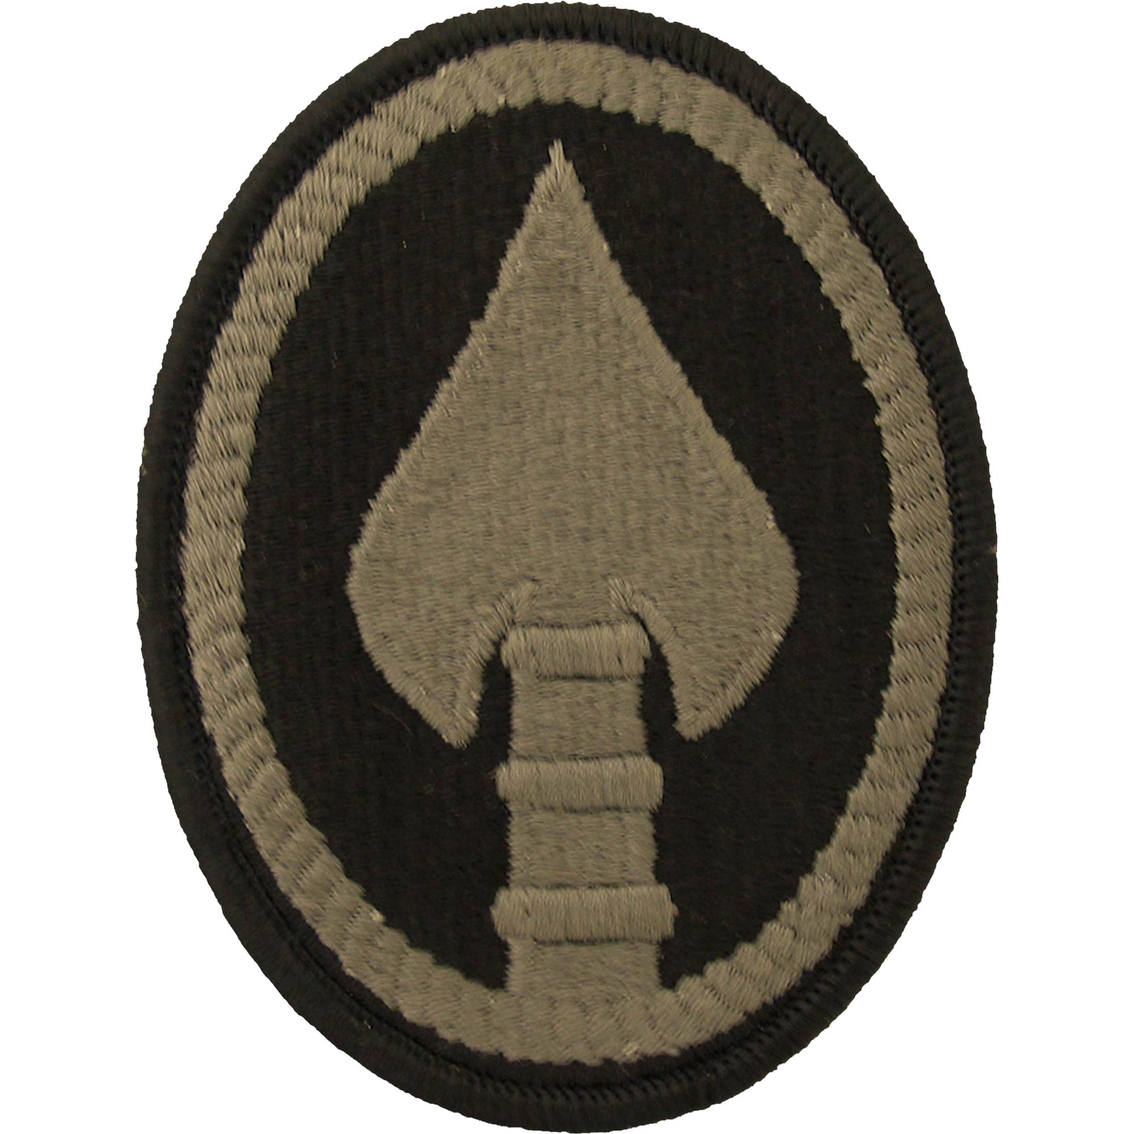 Army Ocp Patches Army Military